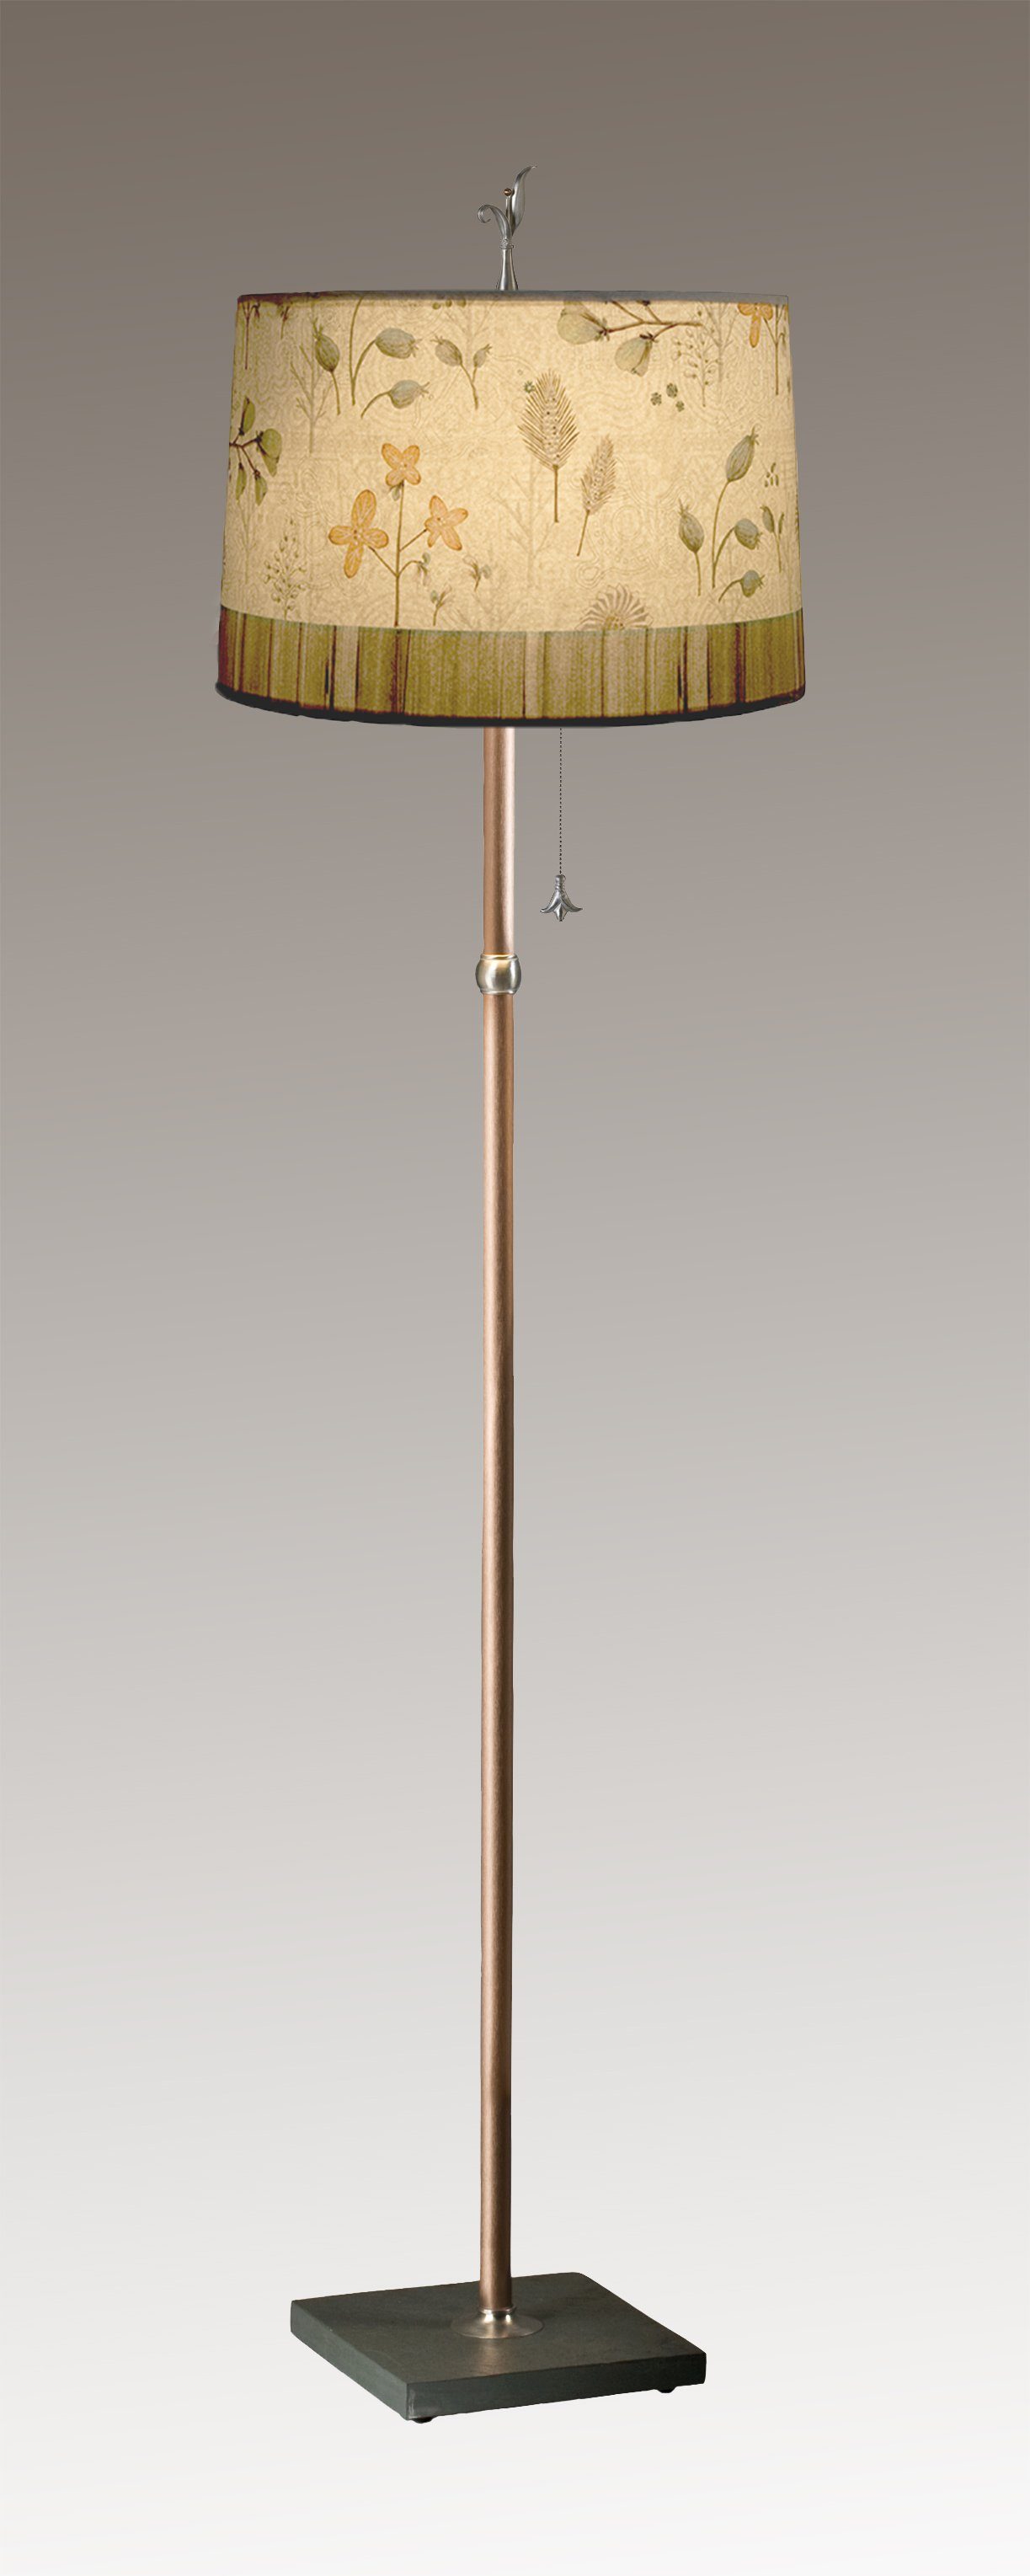 Janna Ugone & Co Floor Lamps Copper Floor Lamp with Large Drum Shade in Flora and Maze